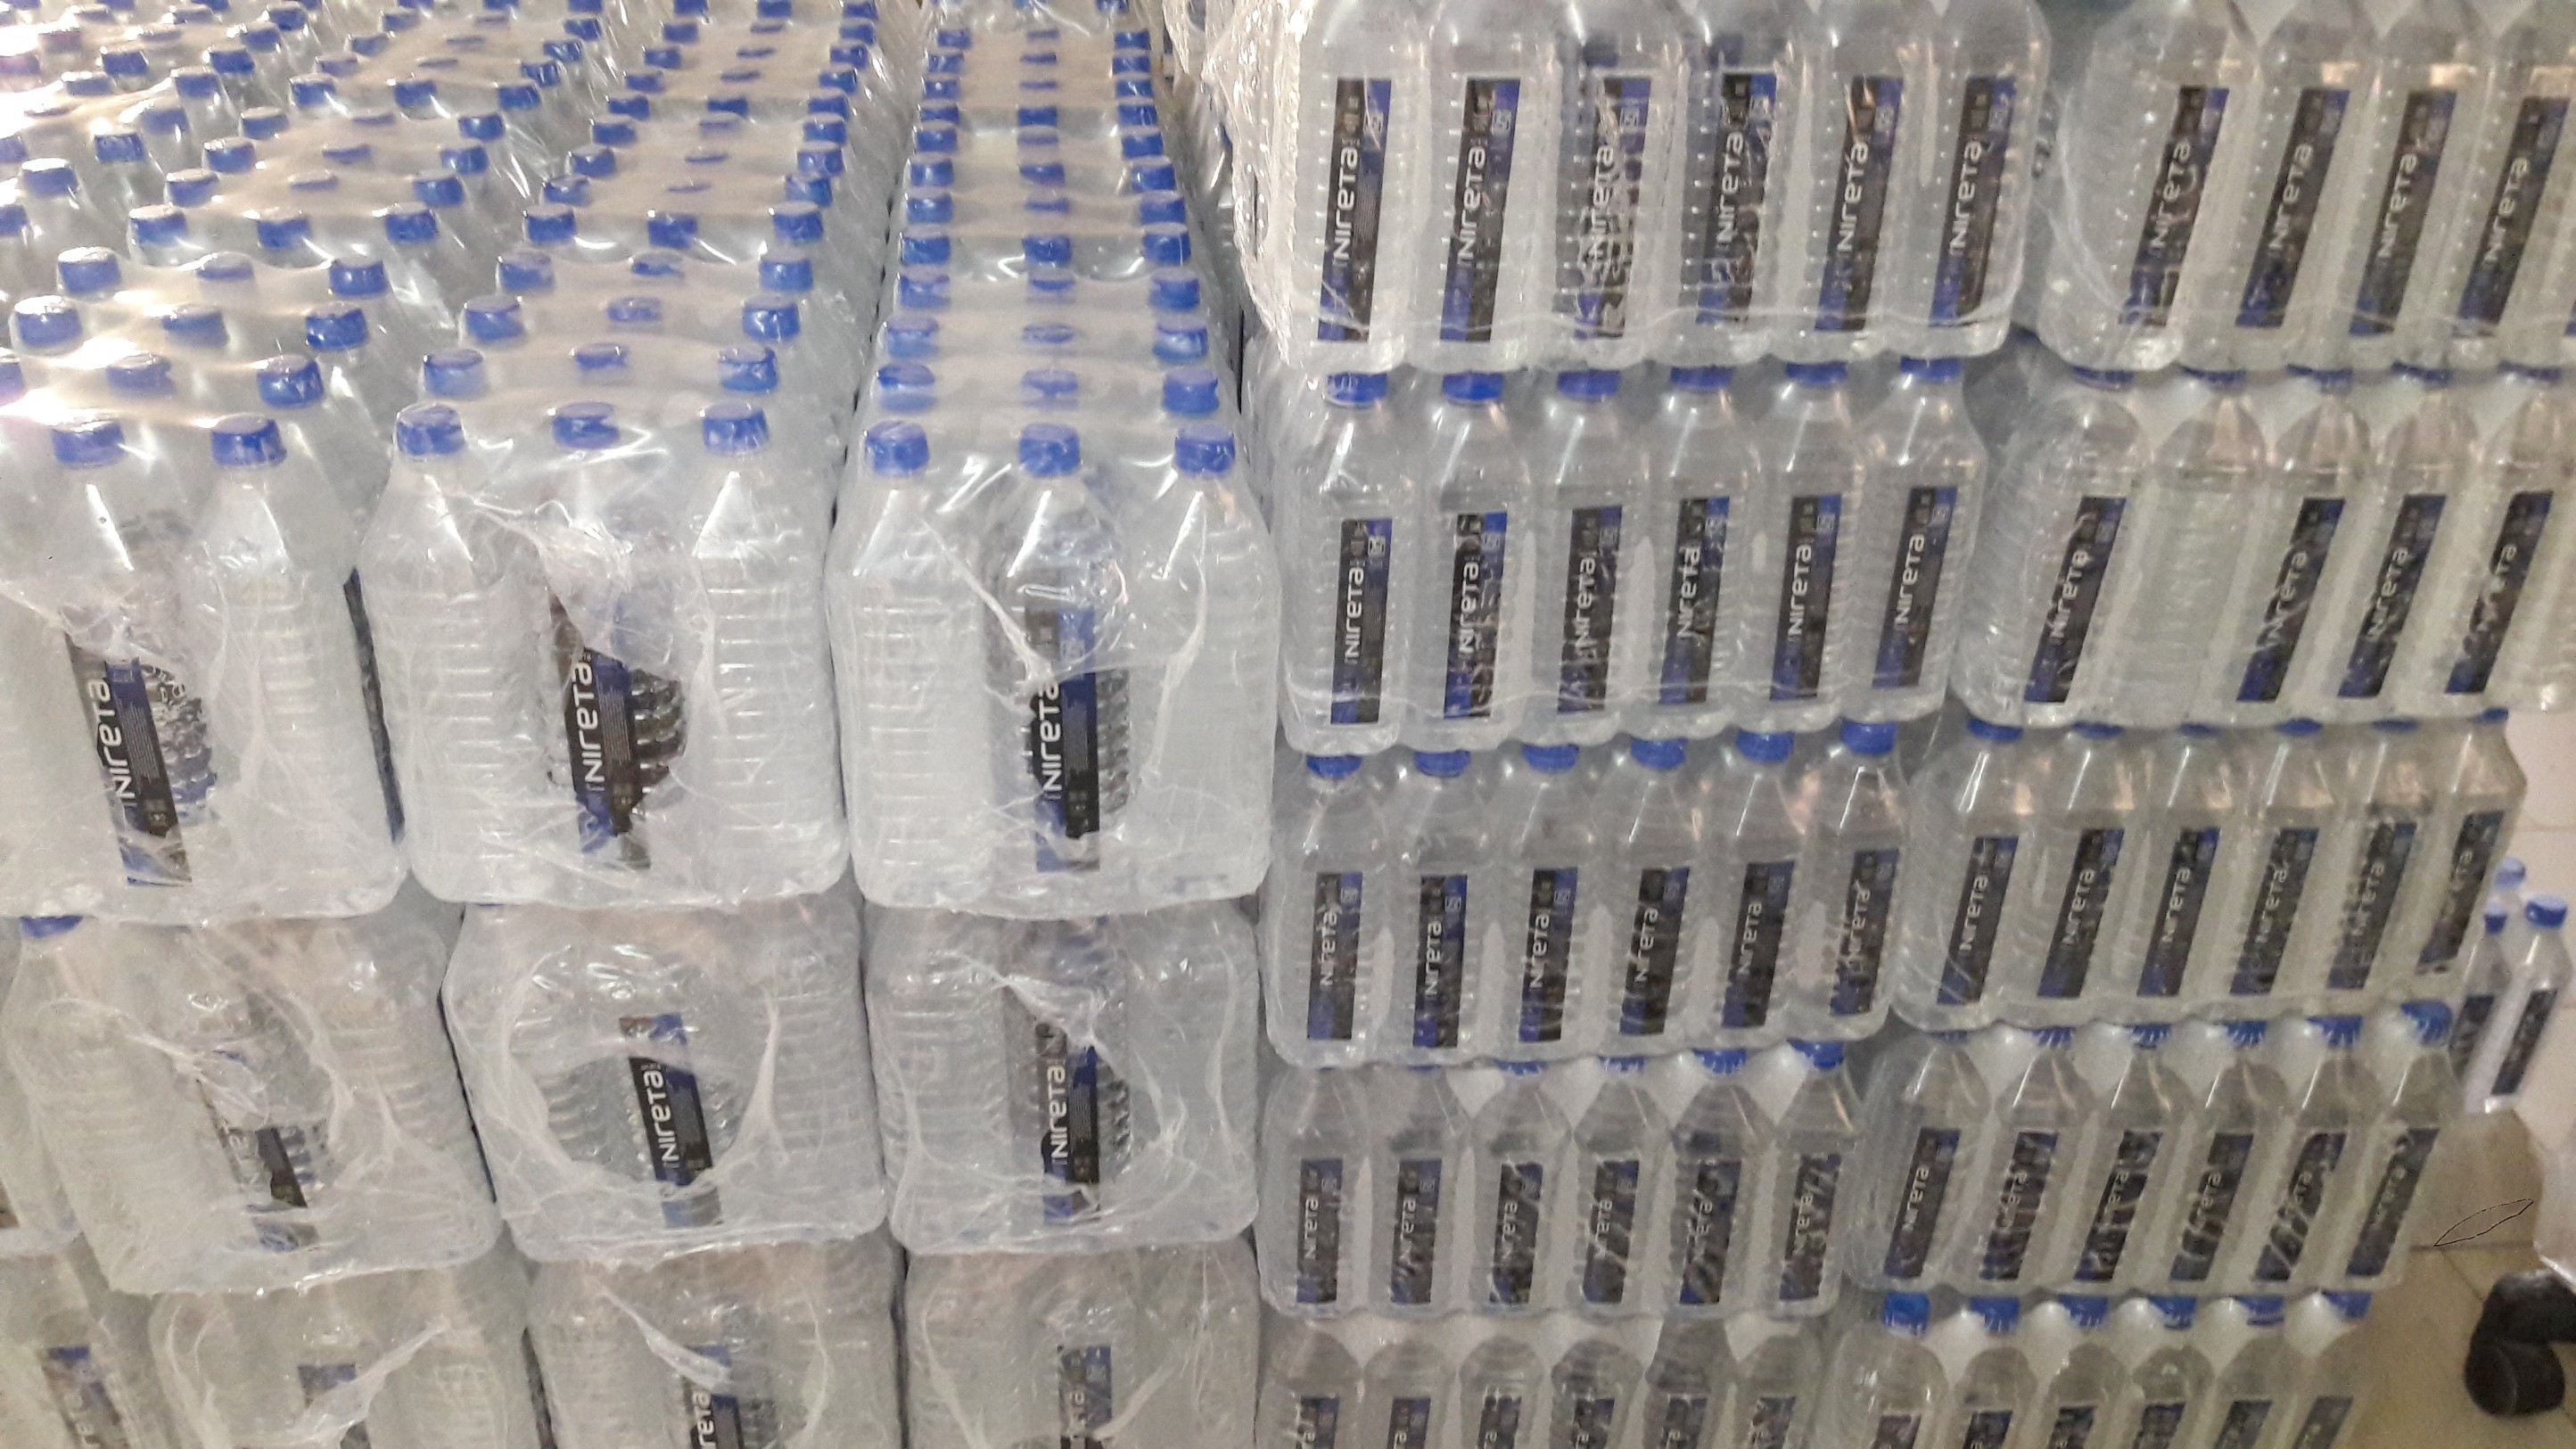 Packaged drinking water from Prash beverages